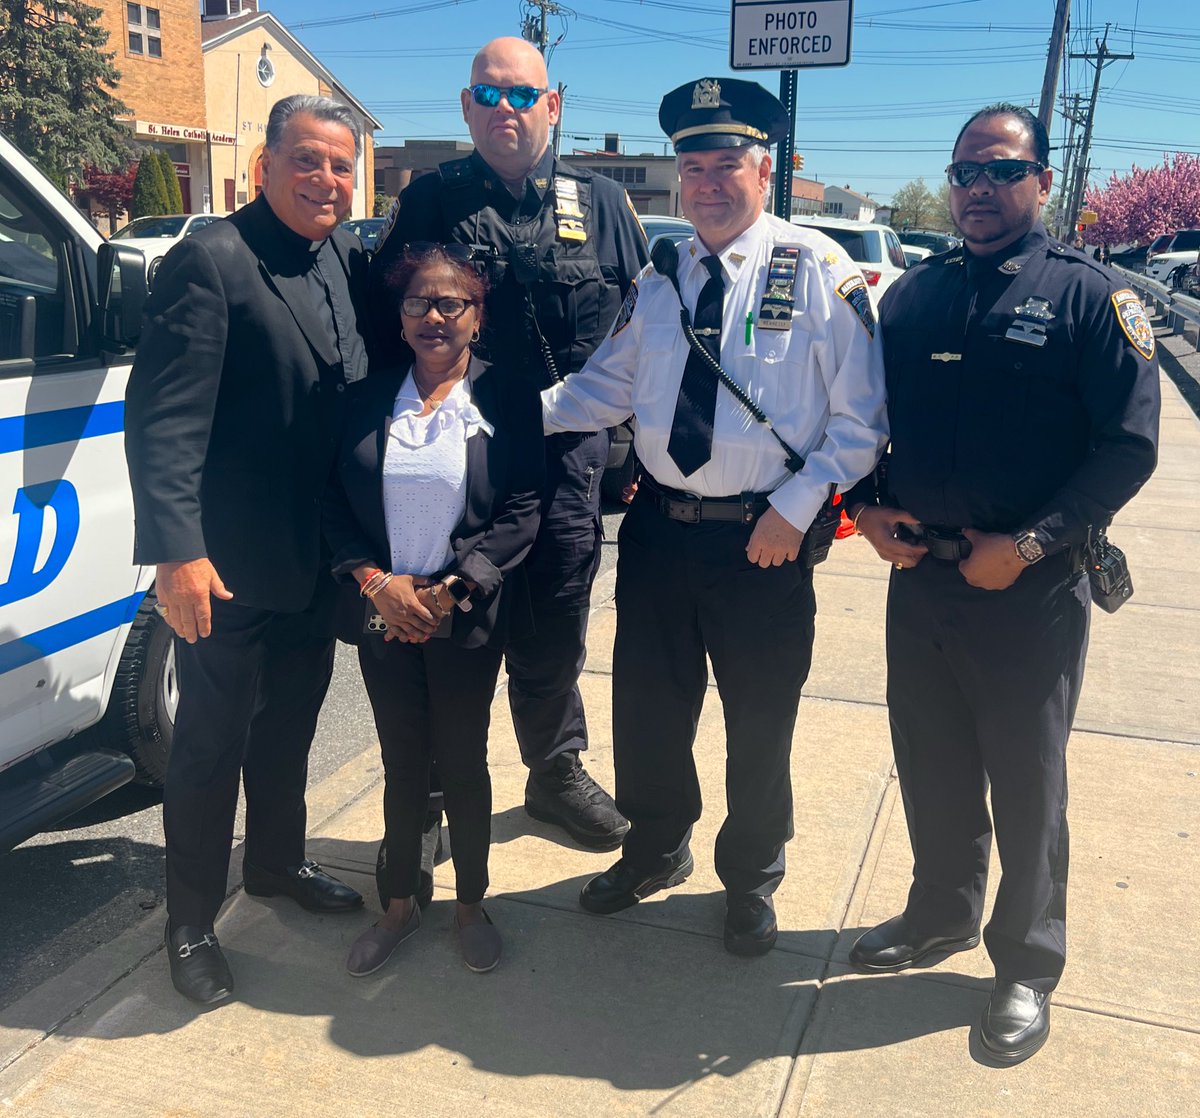 Assistant Chief Chaplain Monsignor David Cassato expressed his sincere gratitude to the dedicated @NYPD106Pct @NYPDauxiliary officers for keeping the community safe. #NYPDConnecting